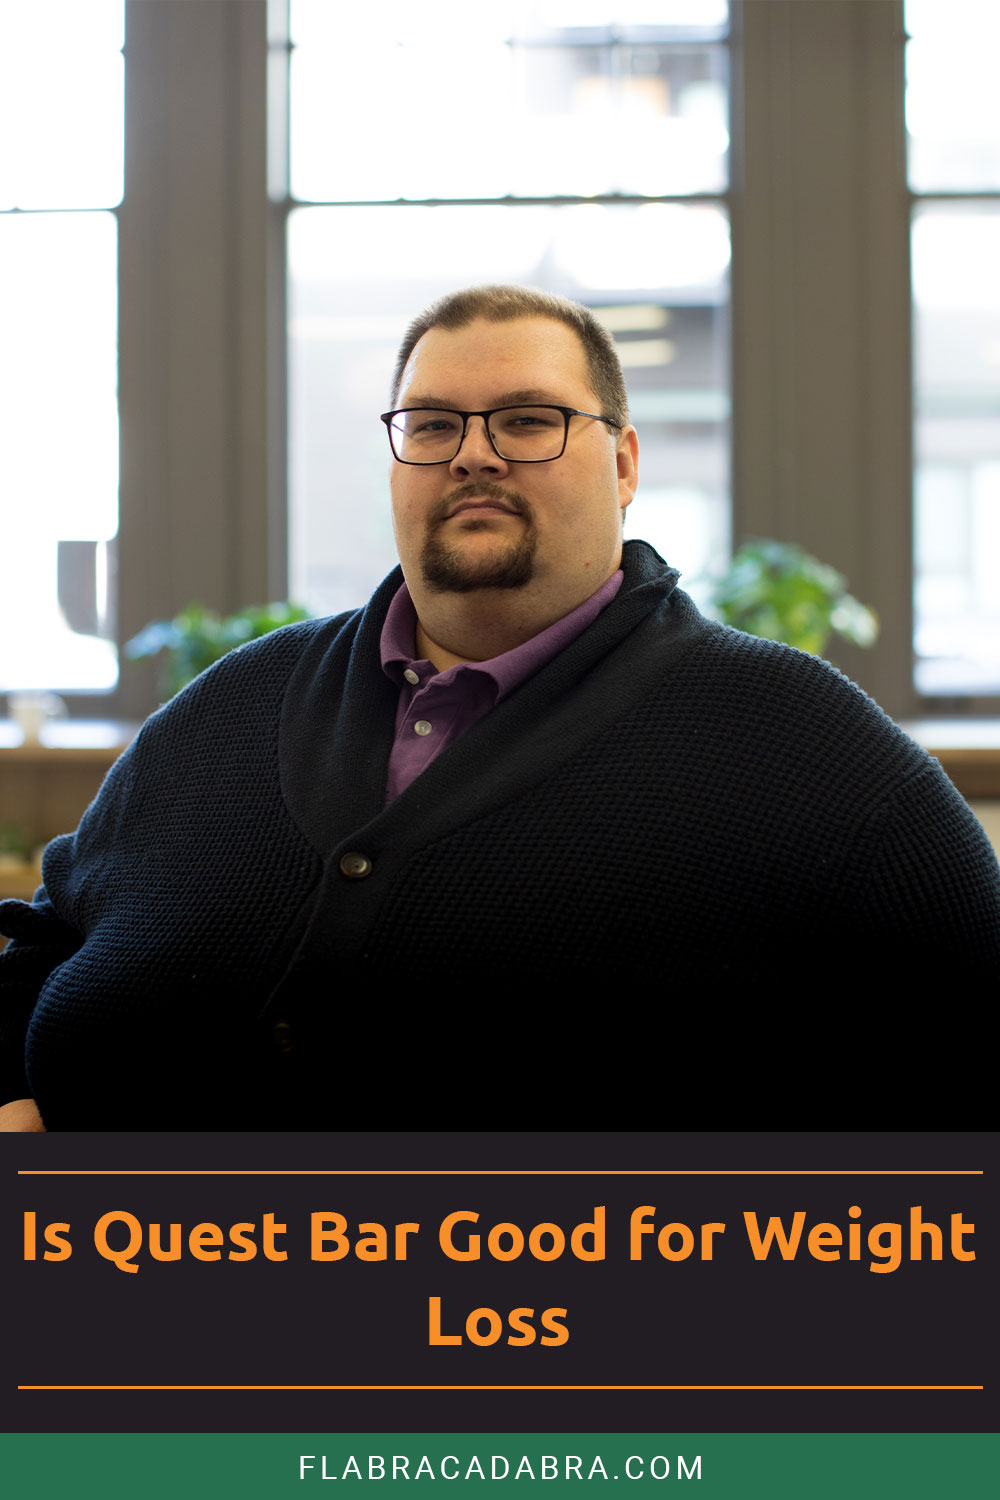 Overweight man with glasses in a black jacket - Is Quest Bar Good for Weight Loss